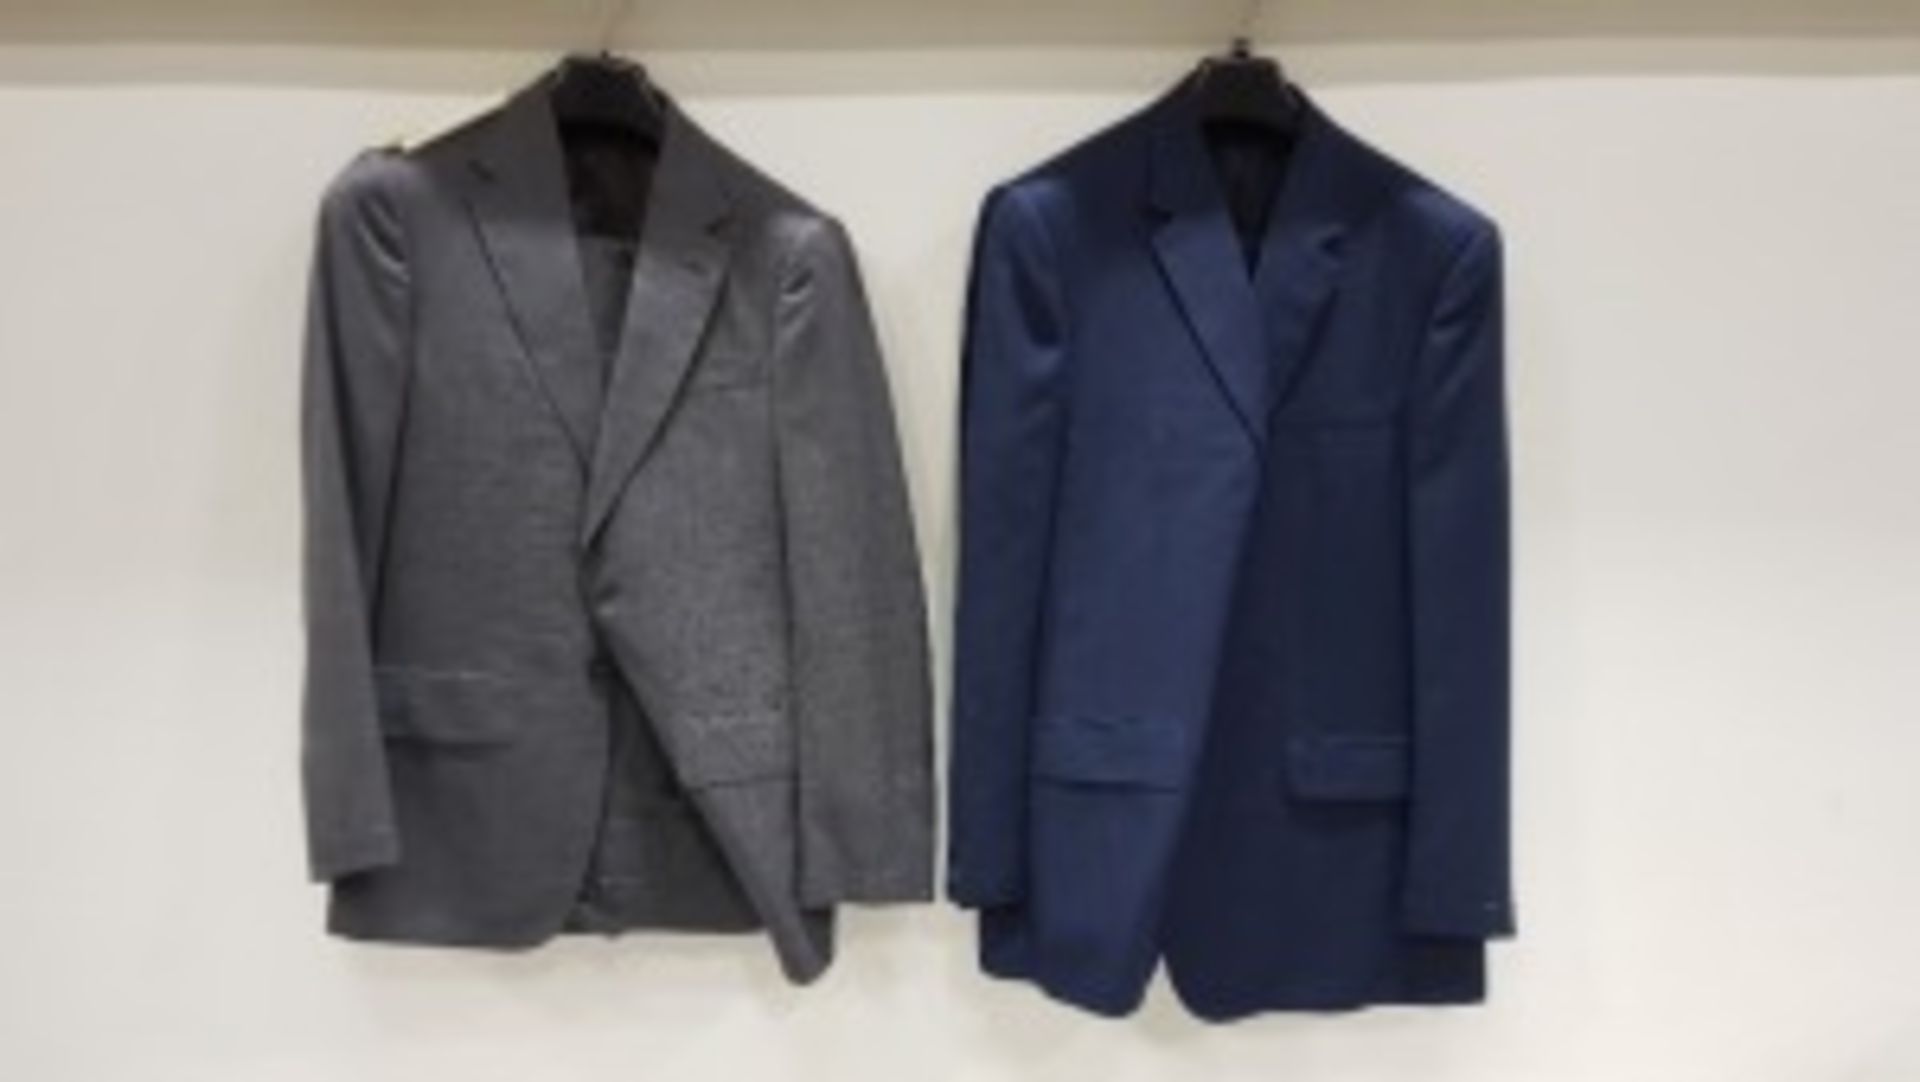 4 X BRAND NEW LUTWYCHE GREY AND BLUE PATTERNED TAILORED SUITS SIZES 36,R46R,38L (PLEASE NOTE SUITS